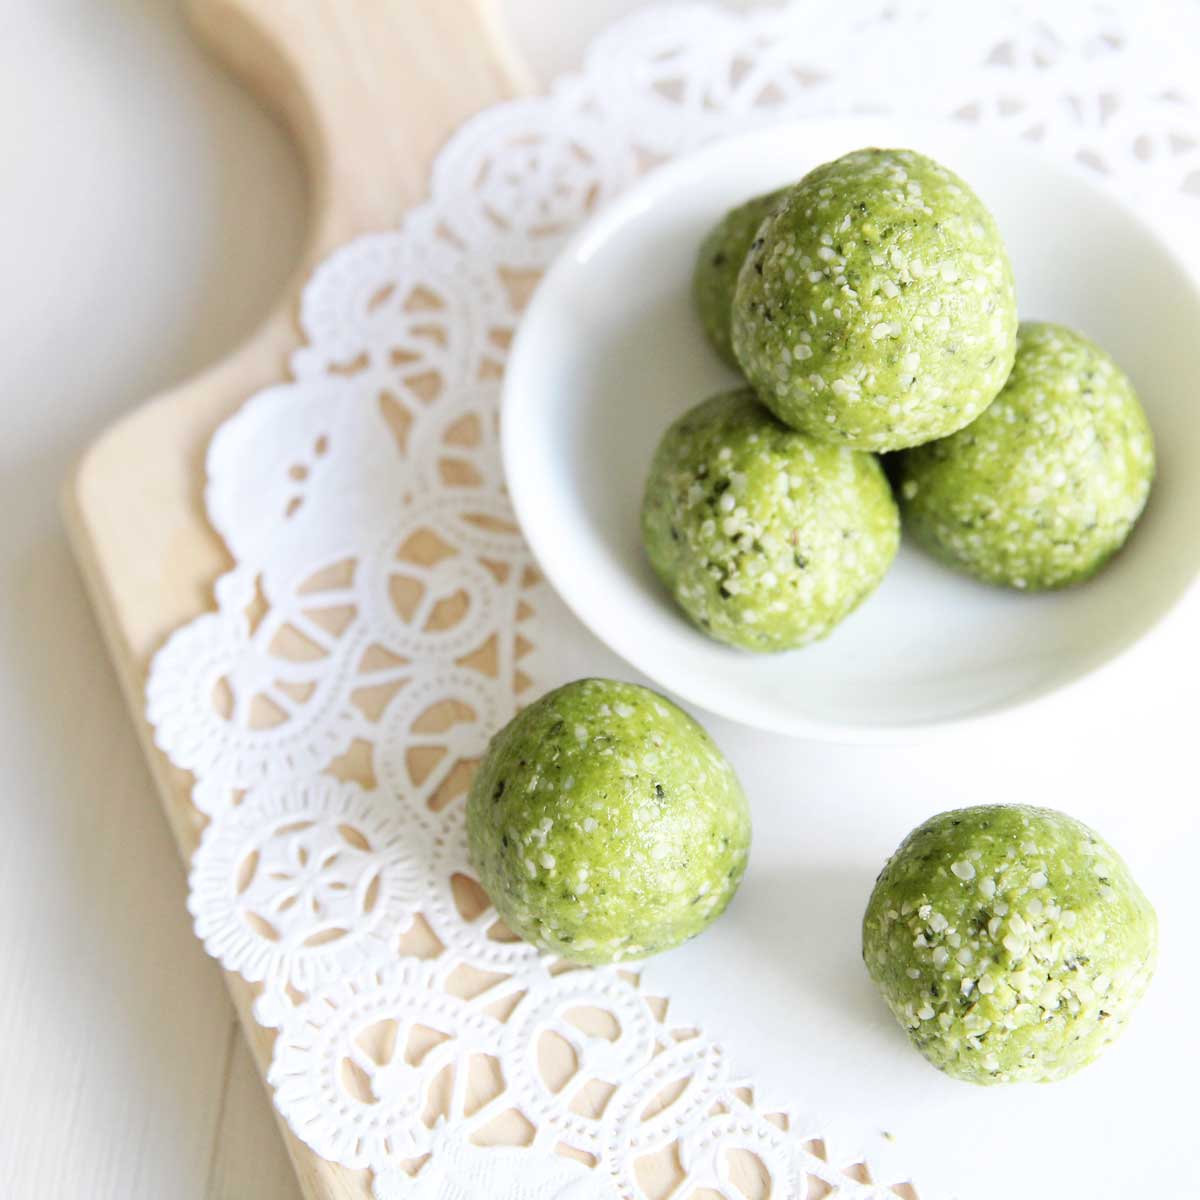 Power Packed Matcha Latte Protein Balls Recipe with Collagen Peptides - Peanut Clusters with Collagen